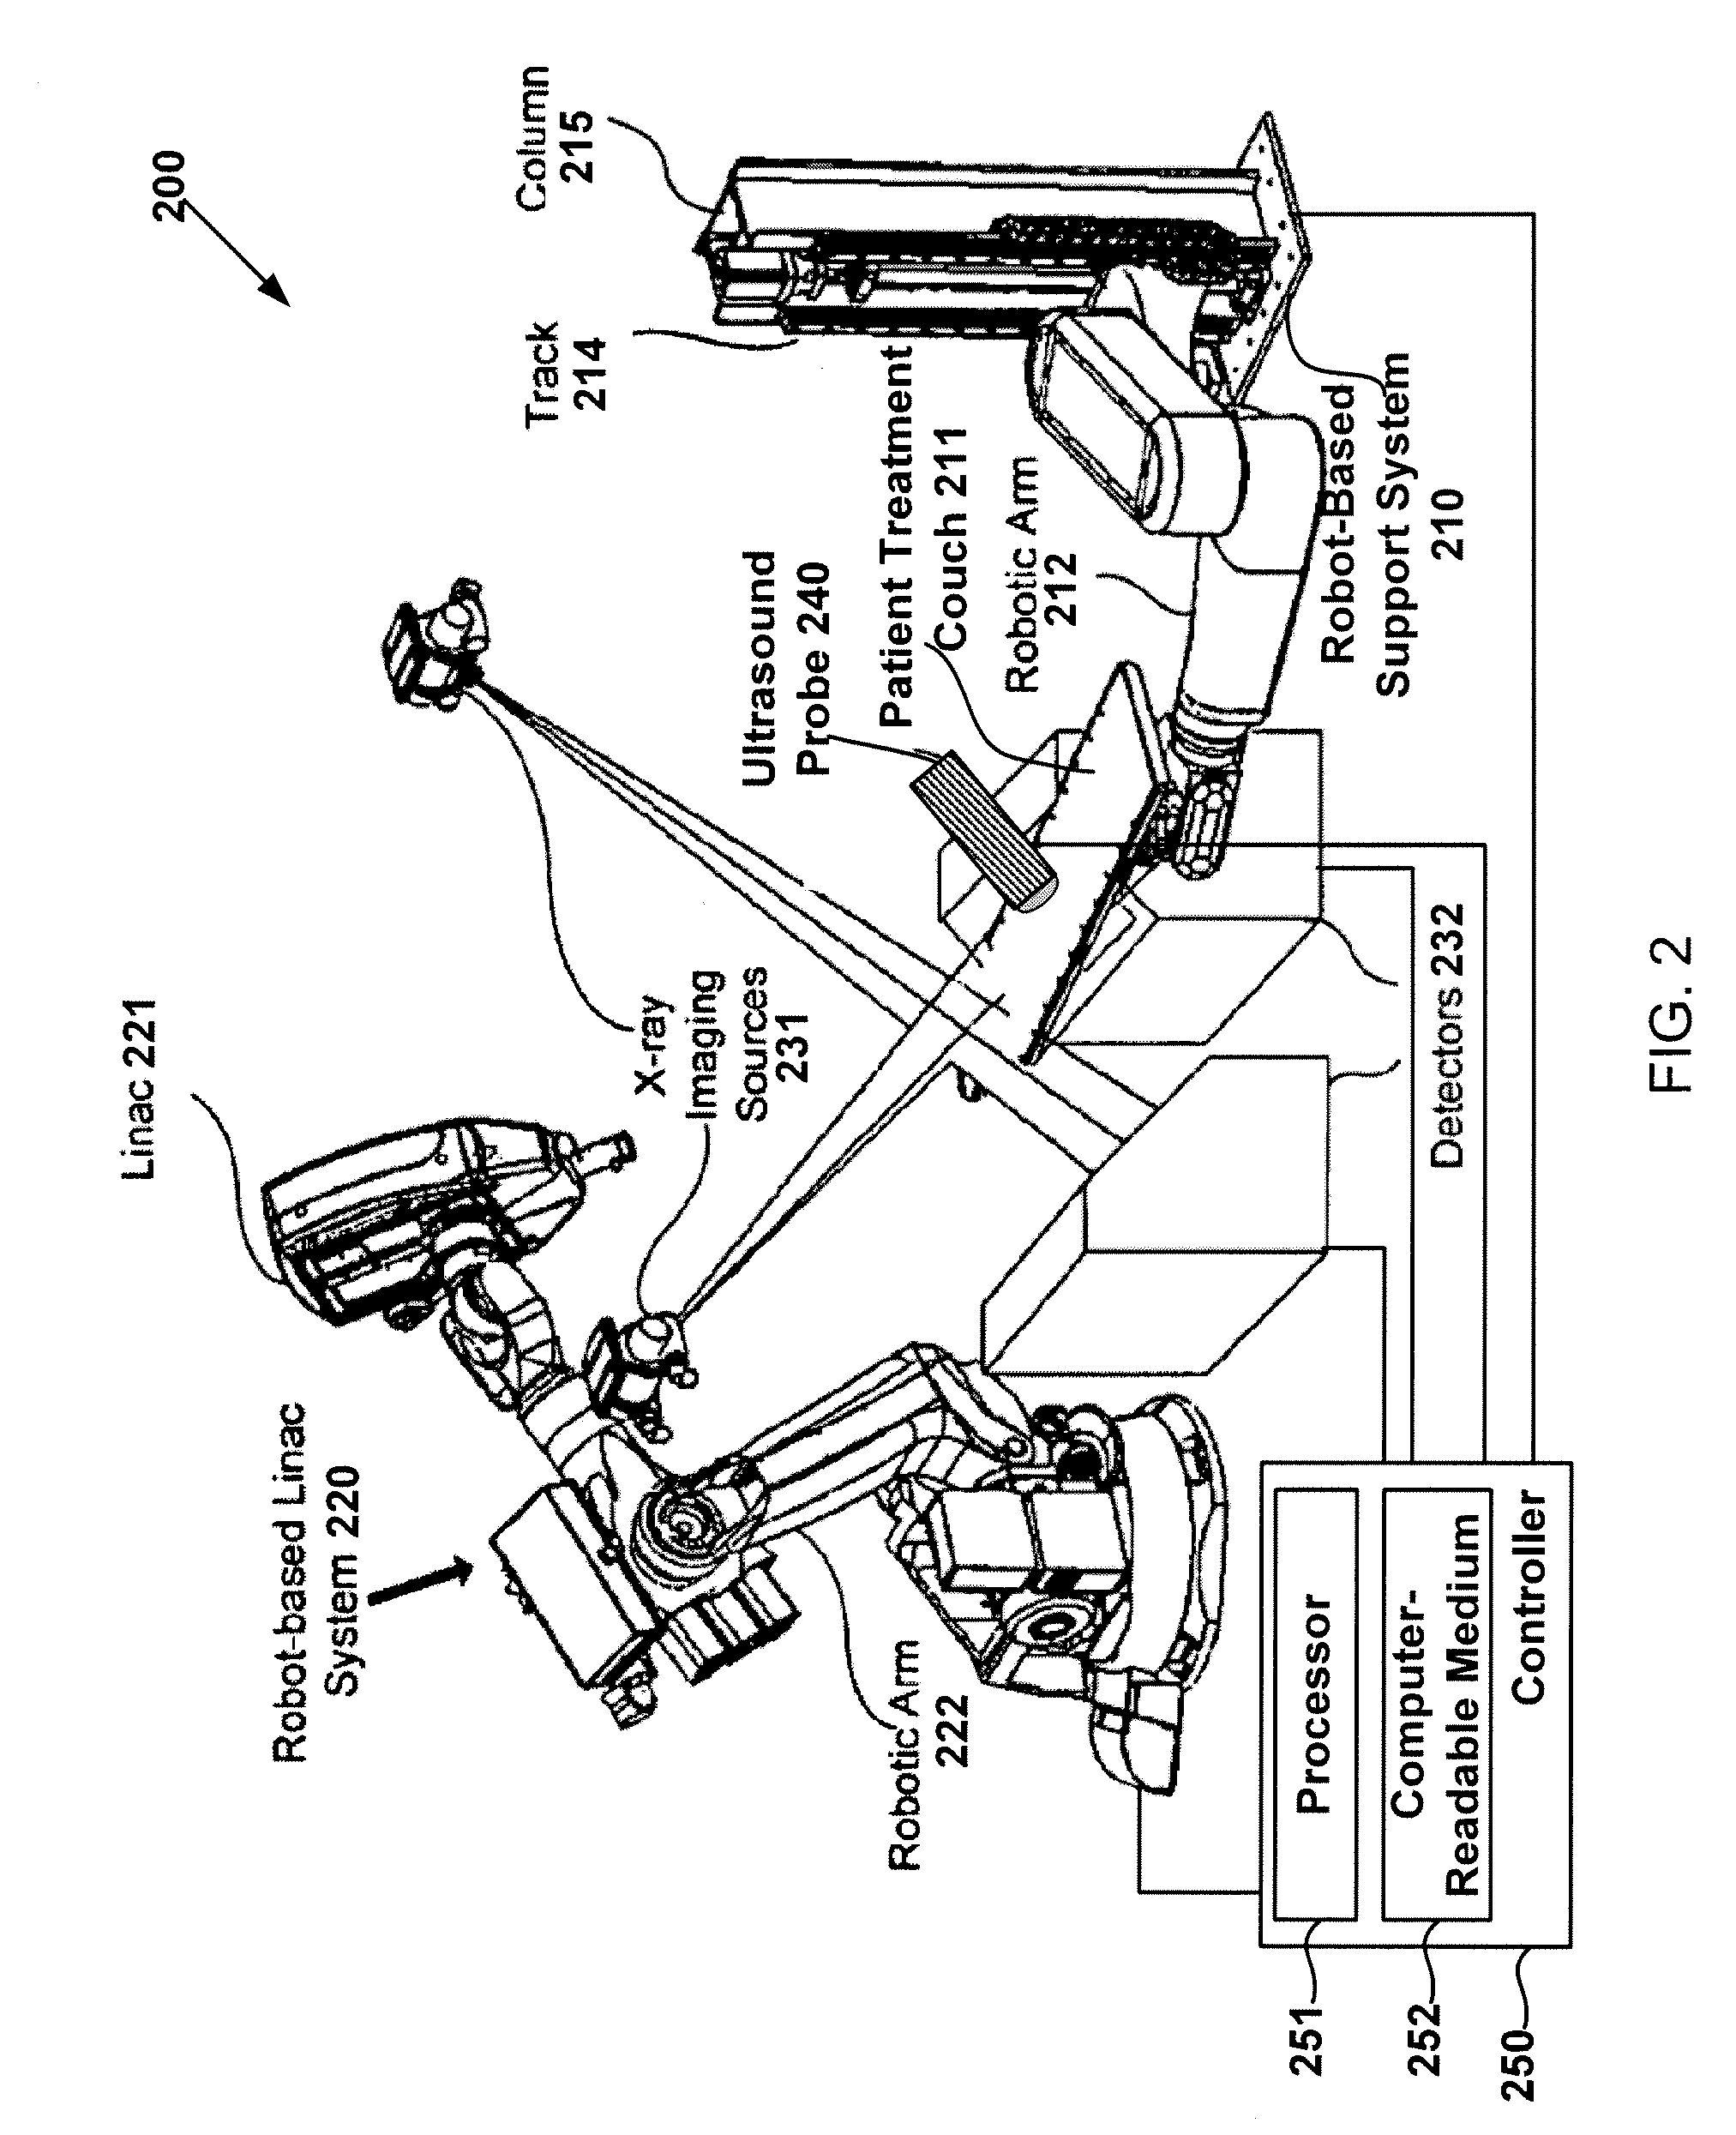 Systems and methods for real-time tumor tracking during radiation treatment using ultrasound imaging